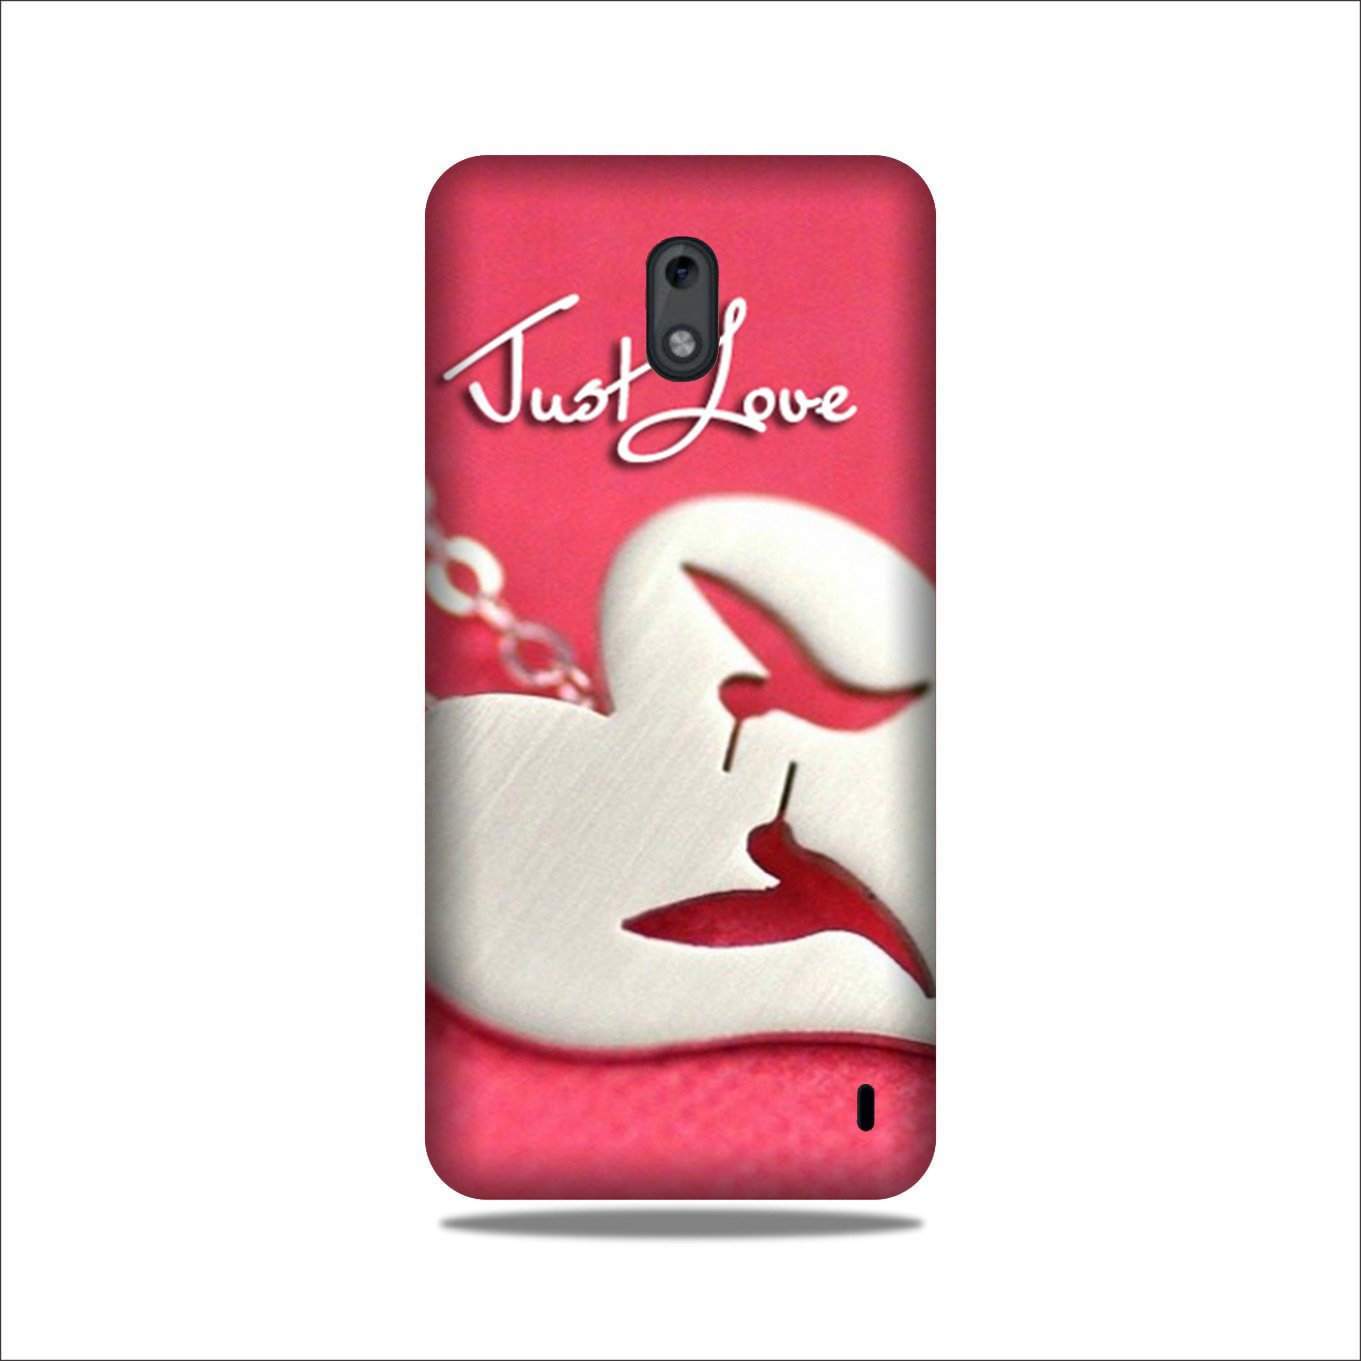 Just love Case for Nokia 2